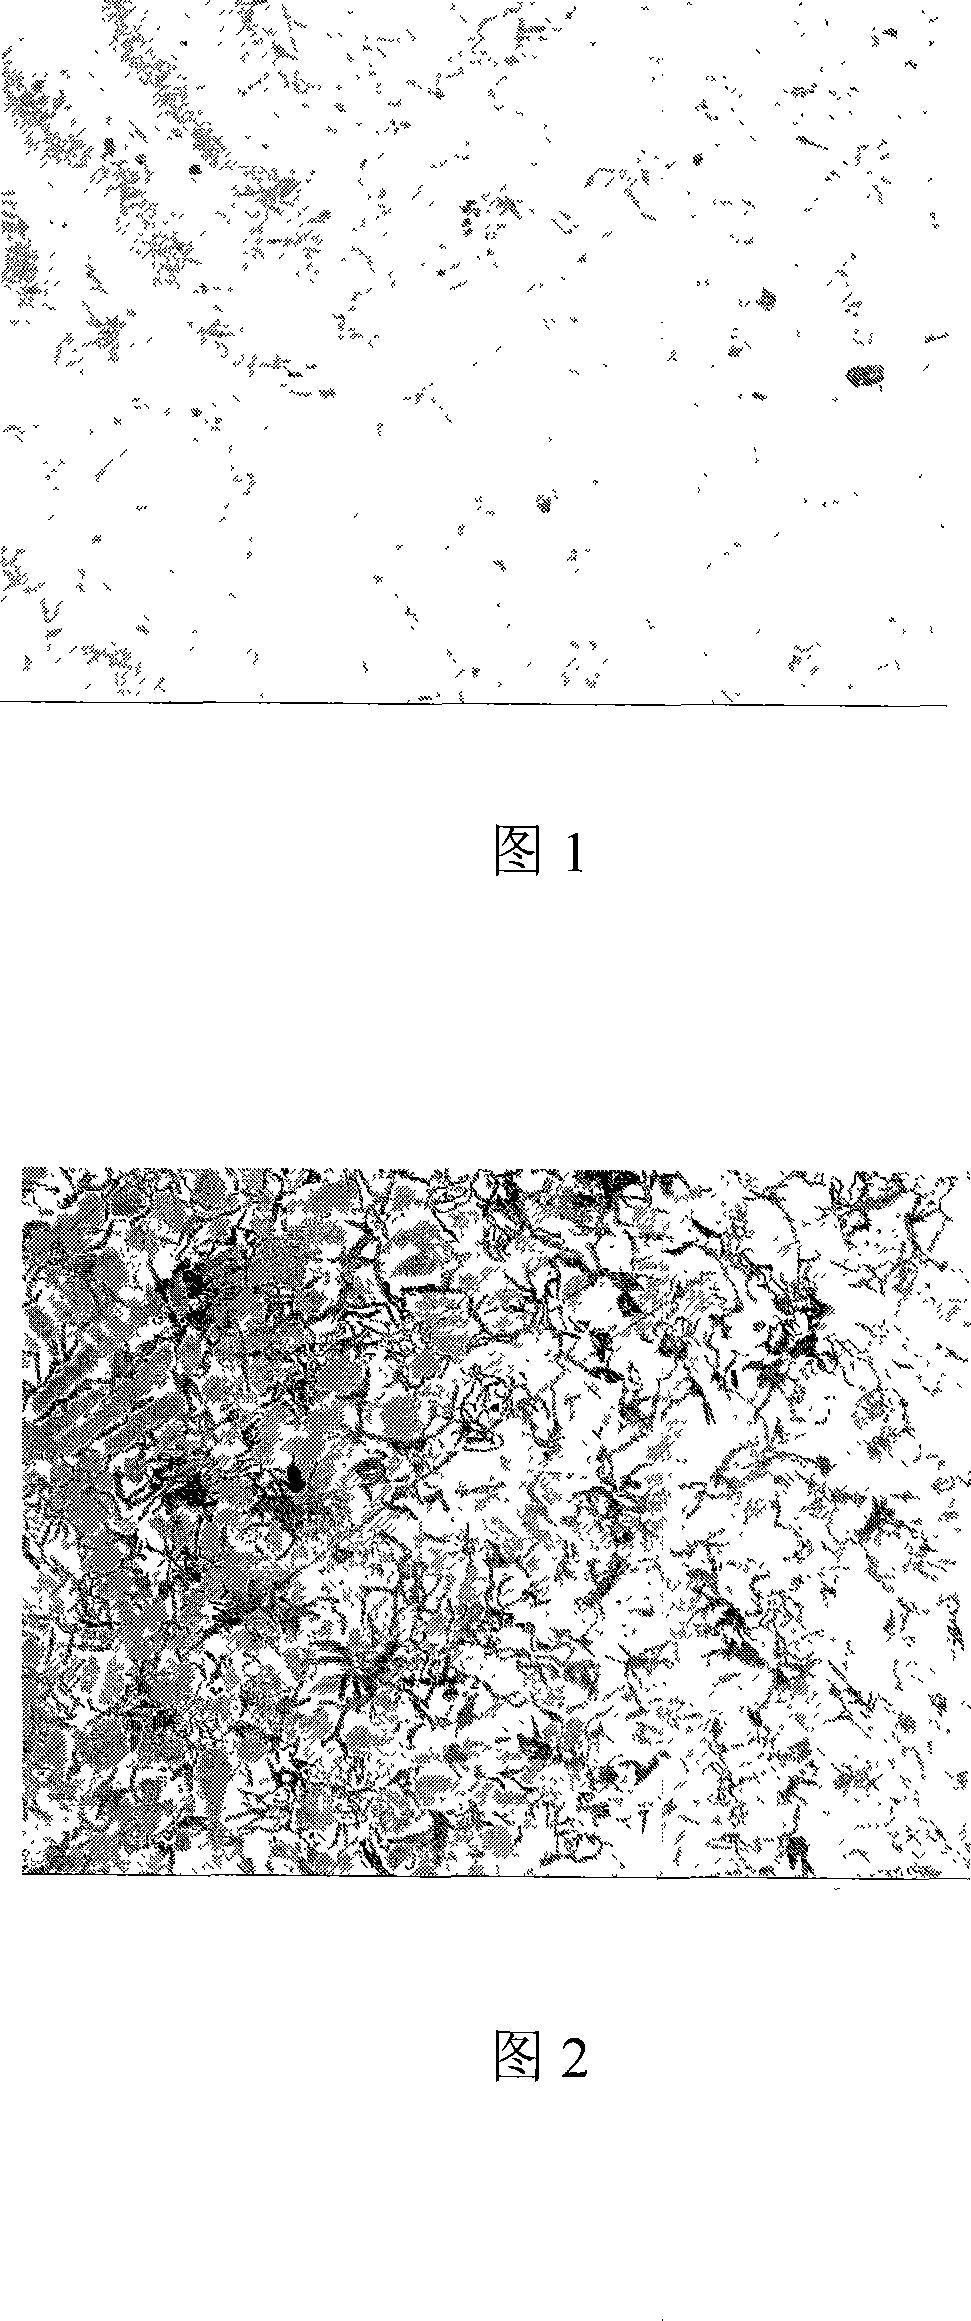 Austenitic gray cast iron material and method for making same